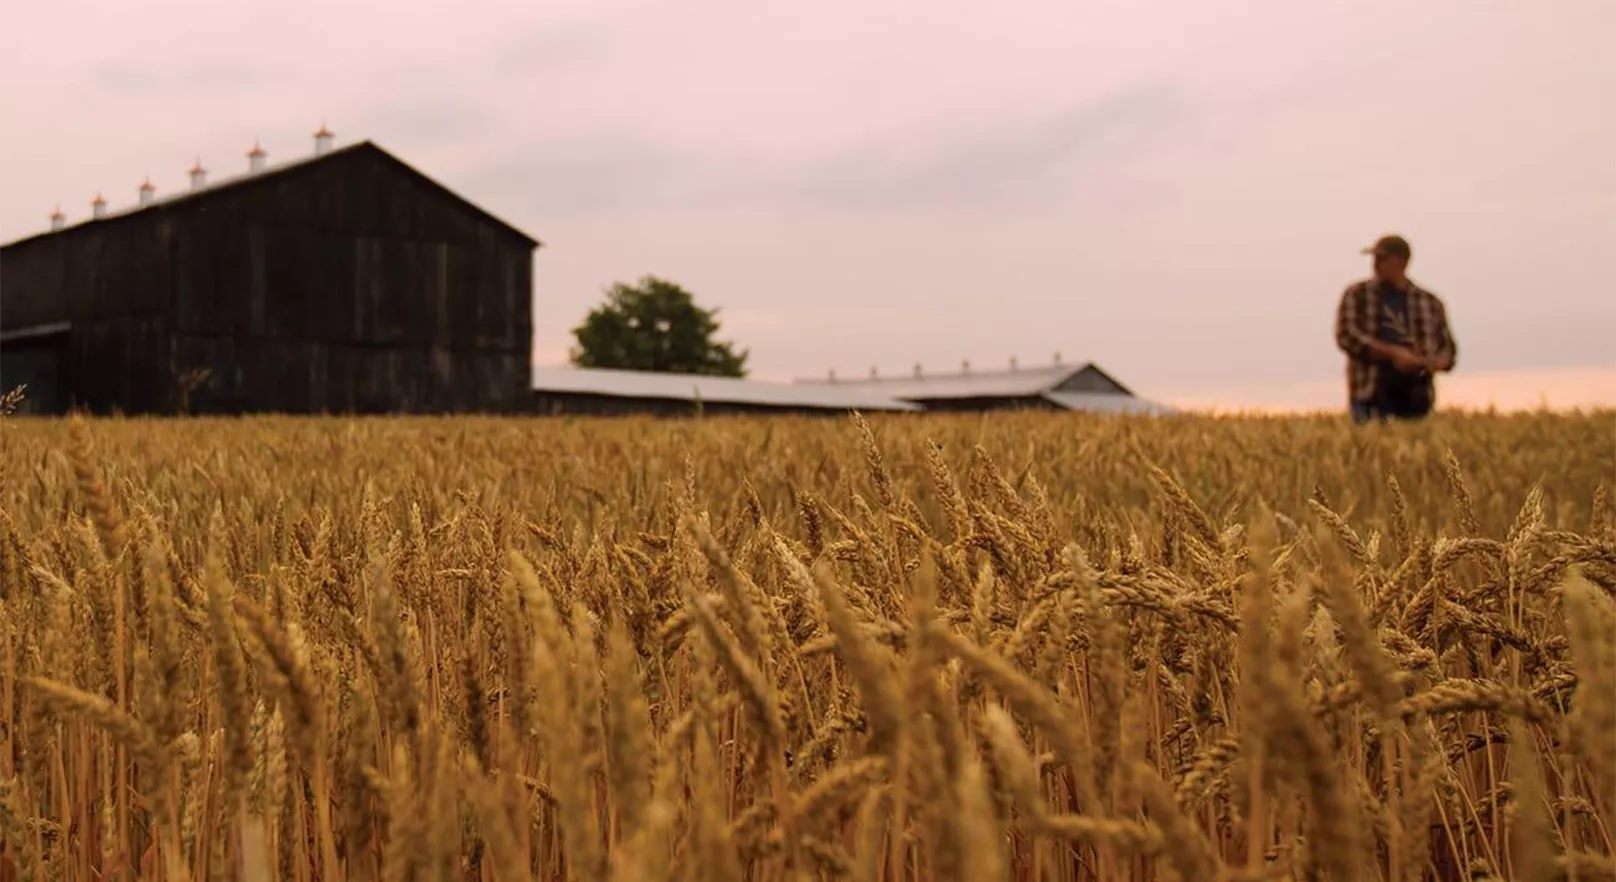 A man in a baseball cap is standing against a backdrop of pink skies and a barn in a field of barley at the Maker's Mark distillery that is used for propagating their signature yeast strain. 